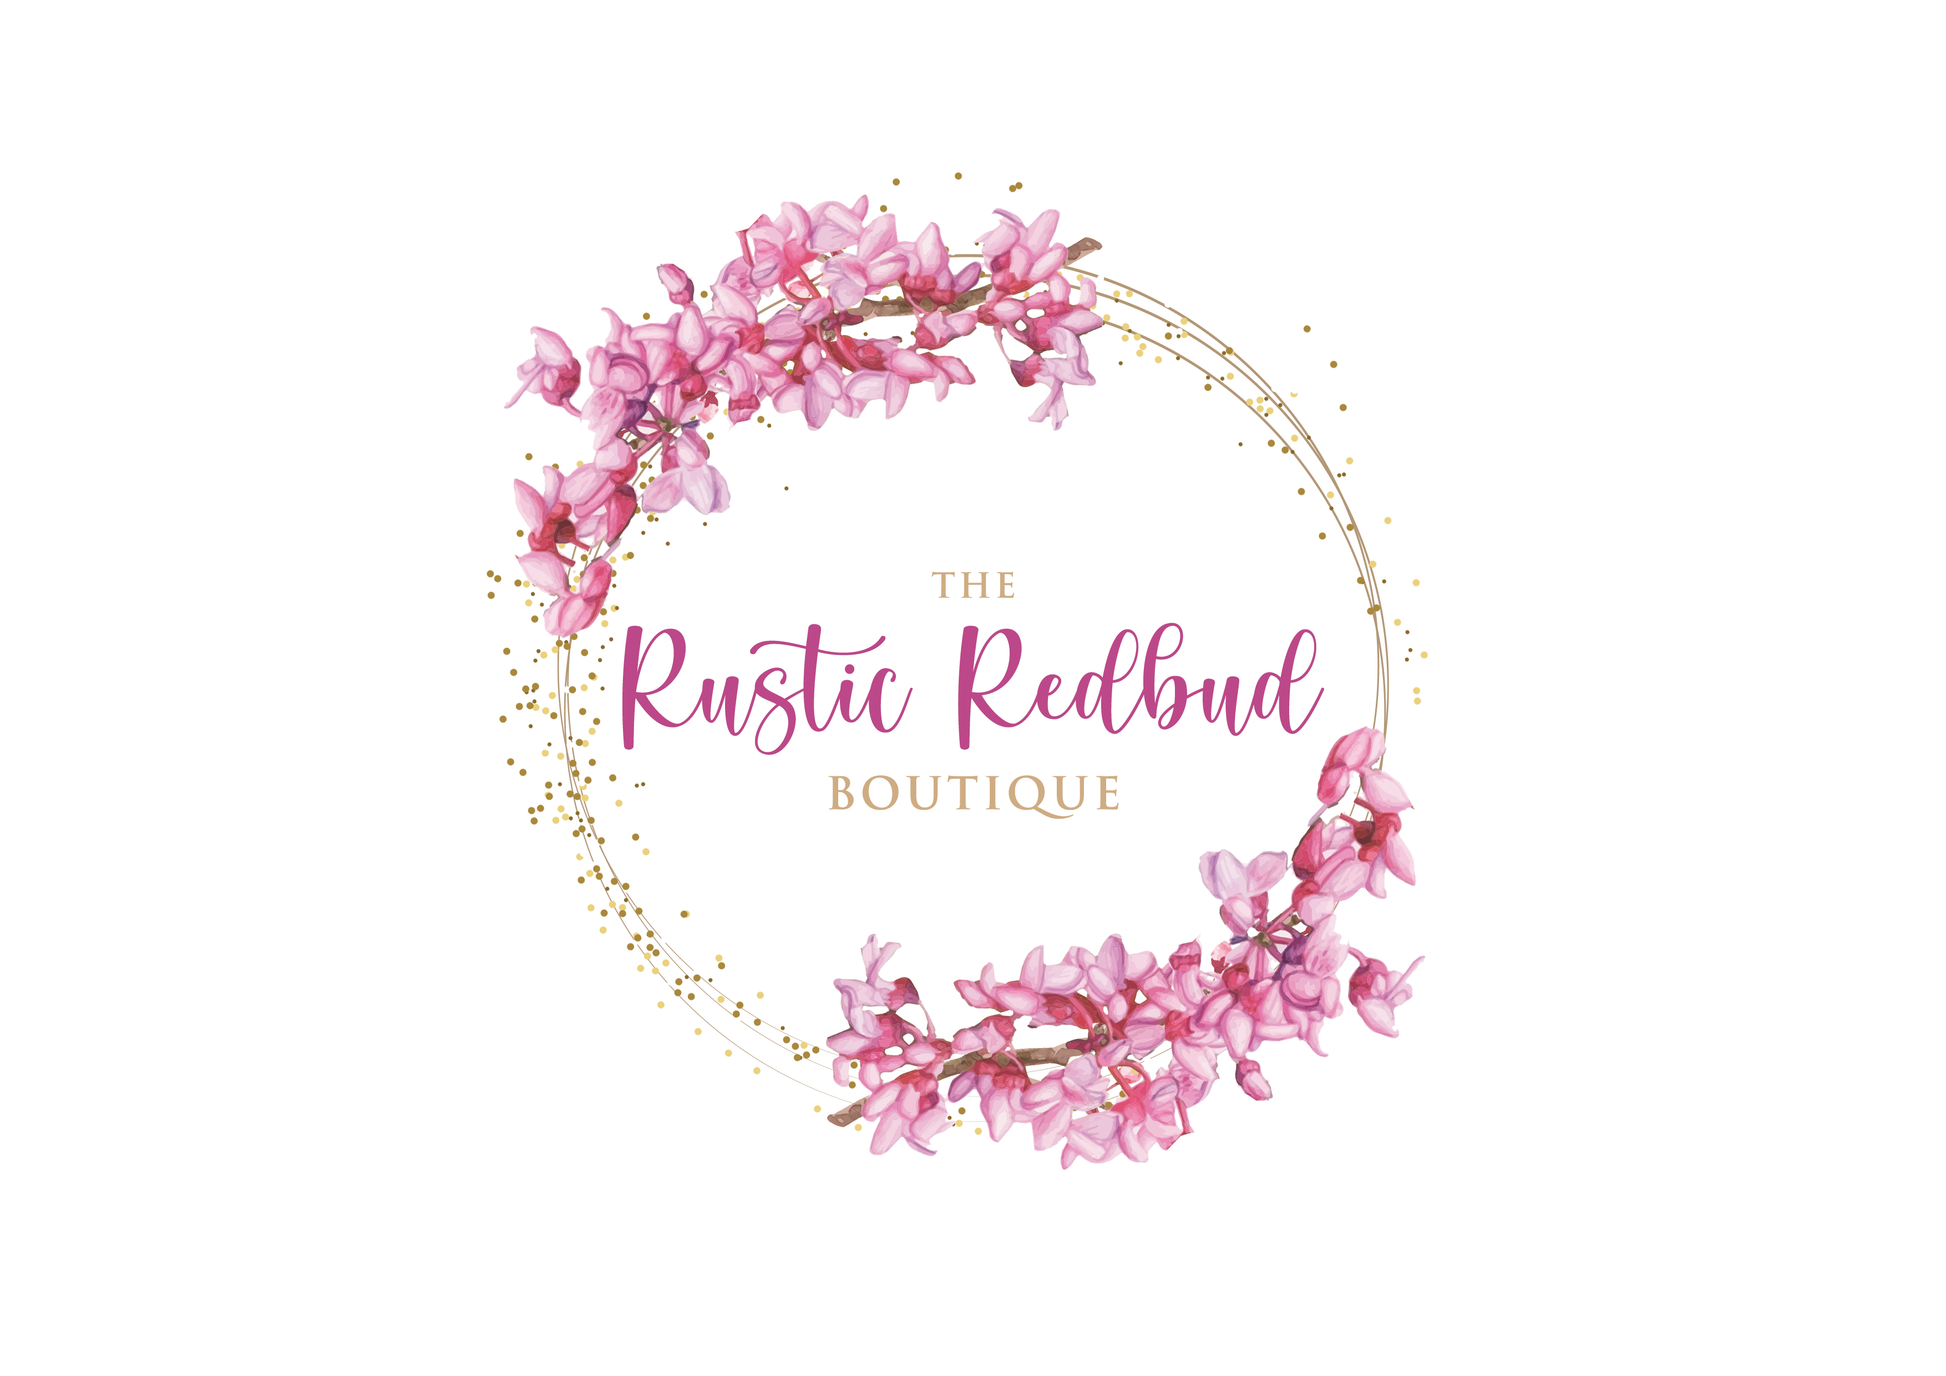 $10 Rustic Redbud Boutique Gift Card $10.00 Clothing by The Rustic Redbud | The Rustic Redbud Boutique